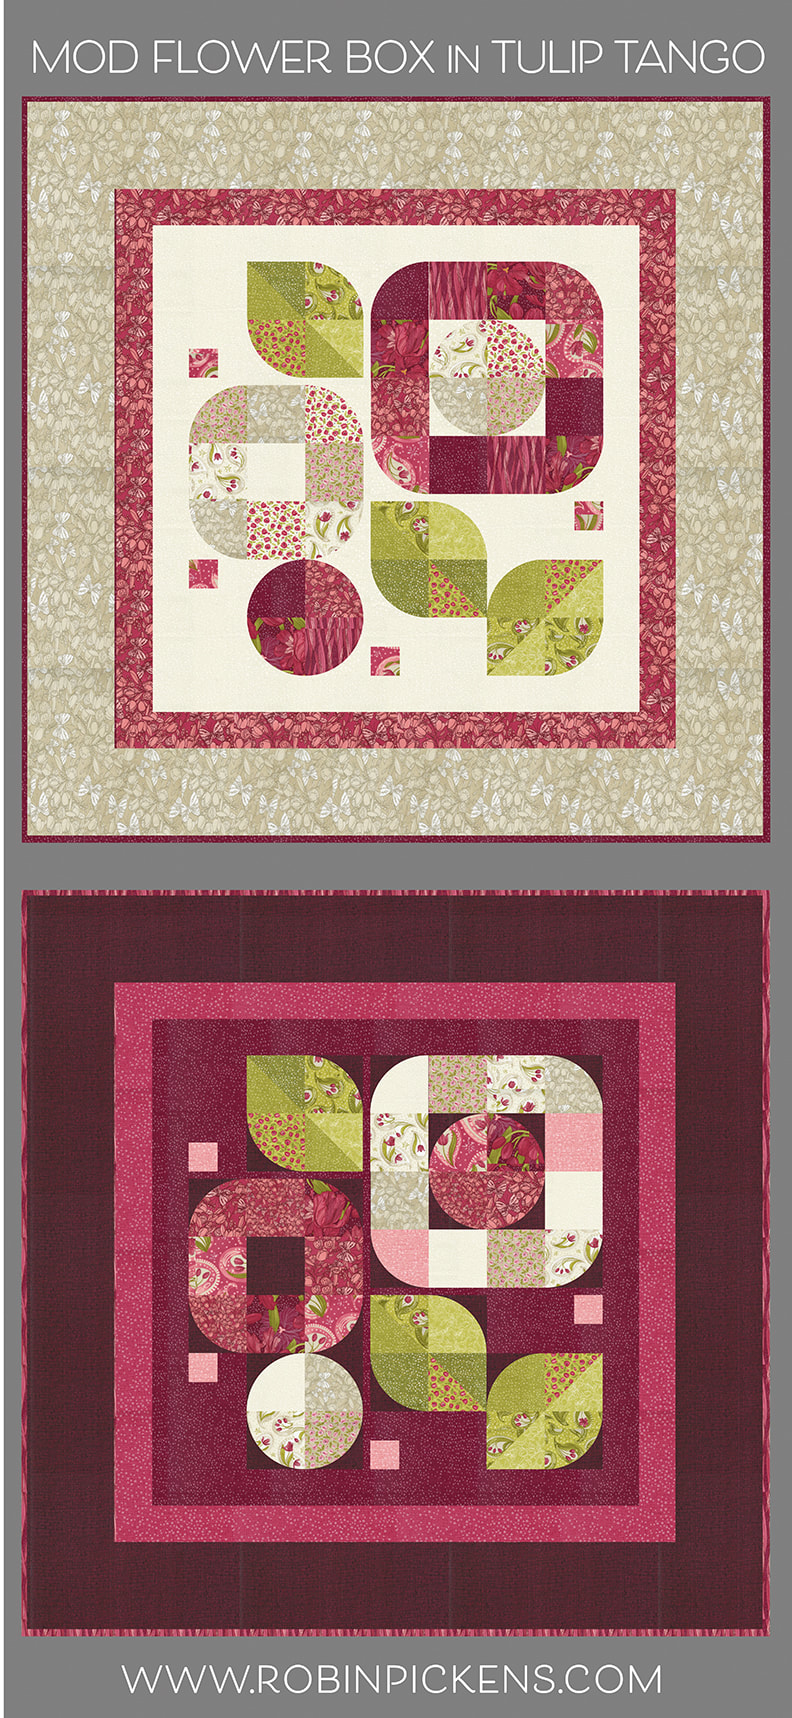 Mod Flower Box quilt in Tulip Tango from Robin Pickens